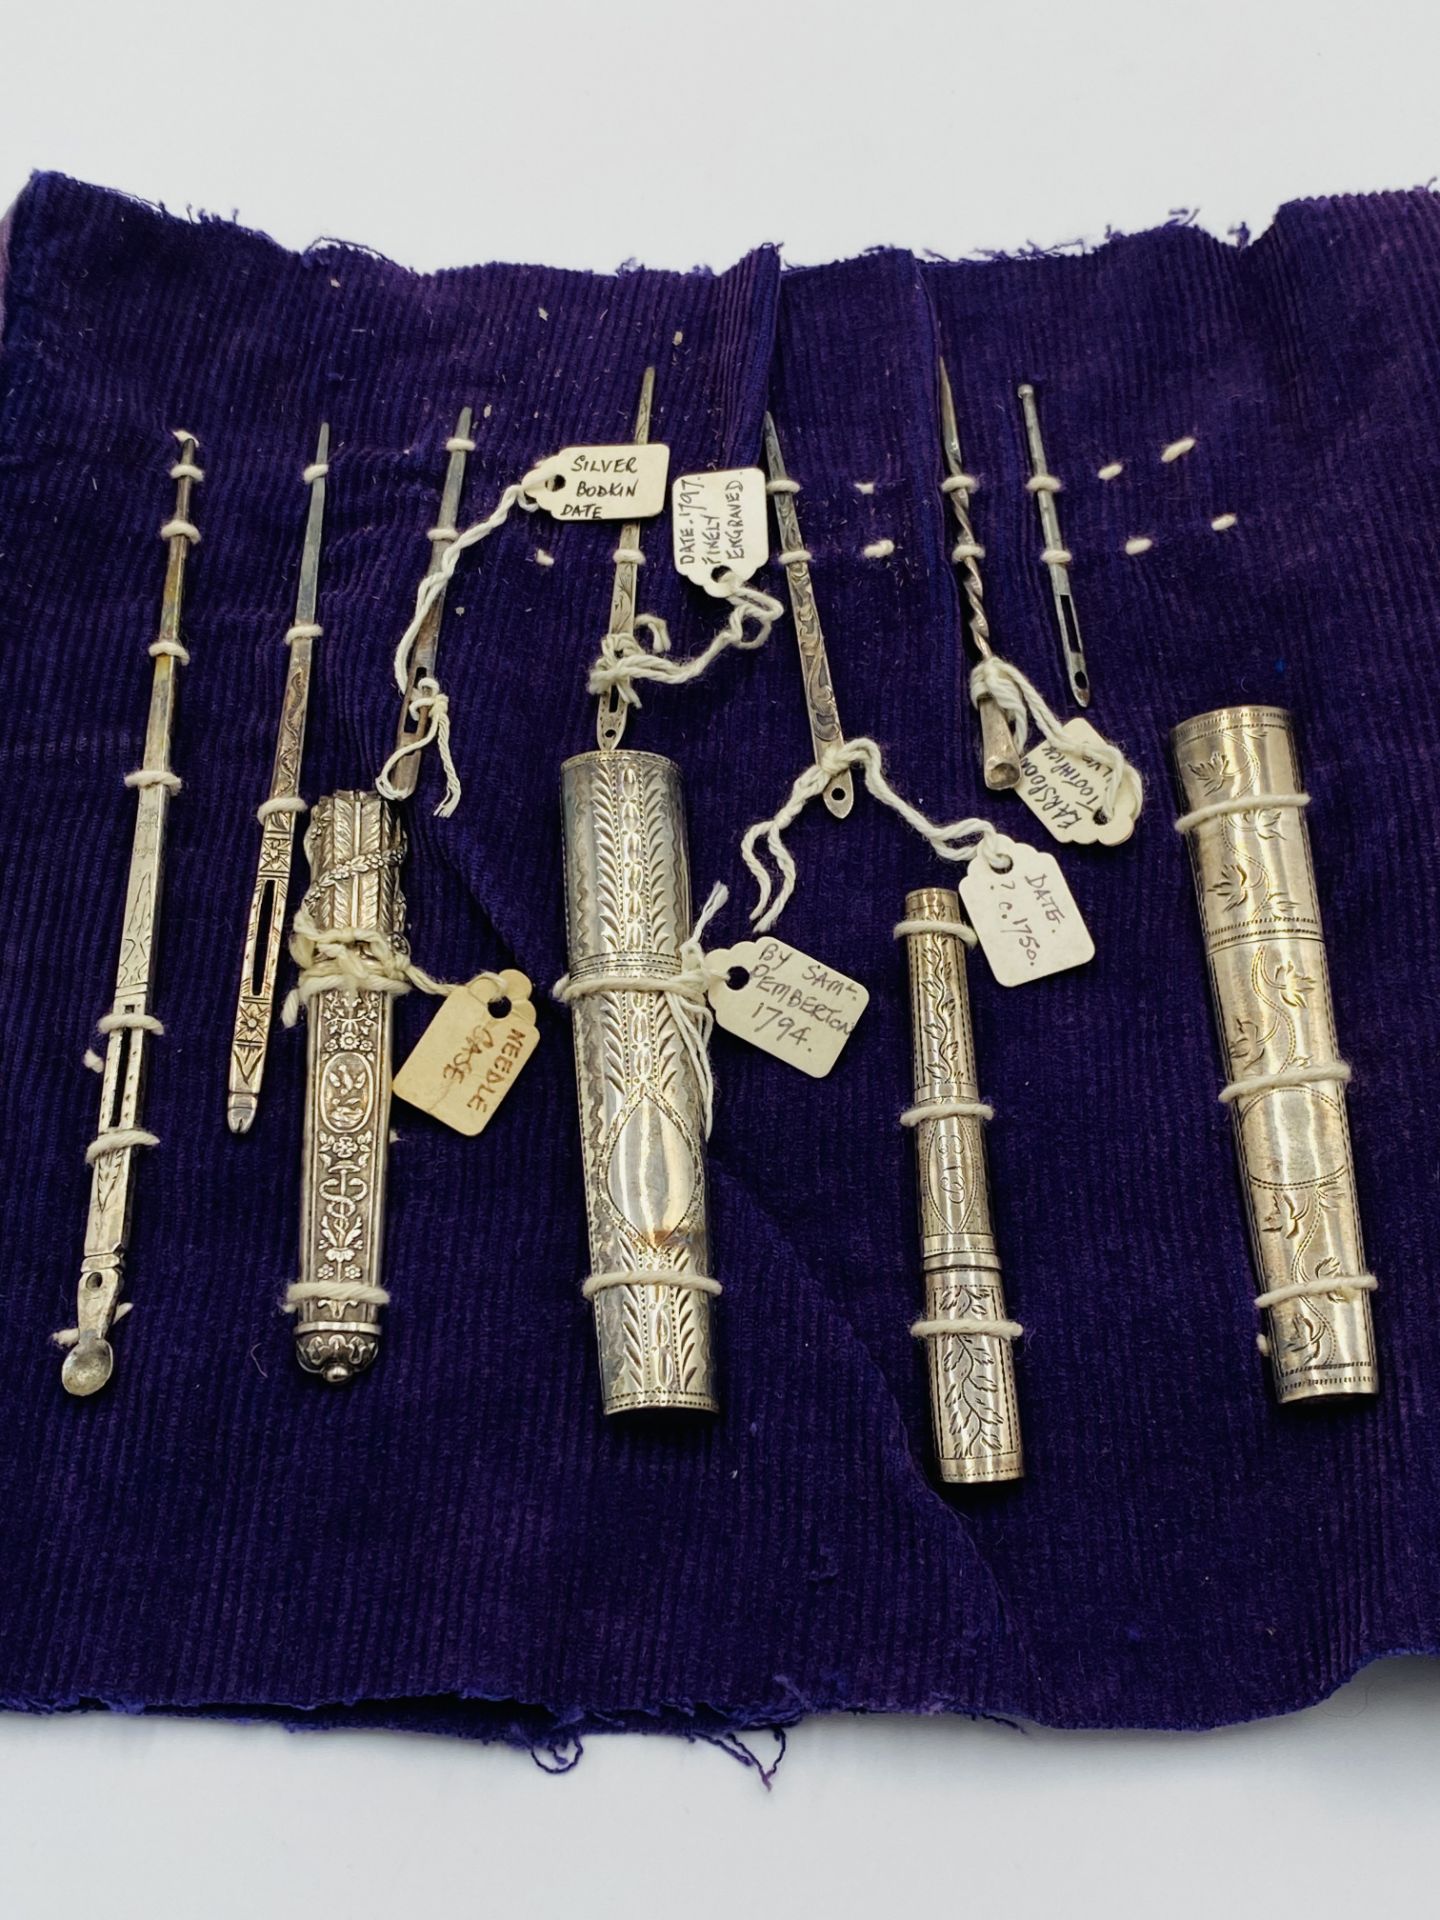 A collection of silver needle cases and bodkins - Image 2 of 5